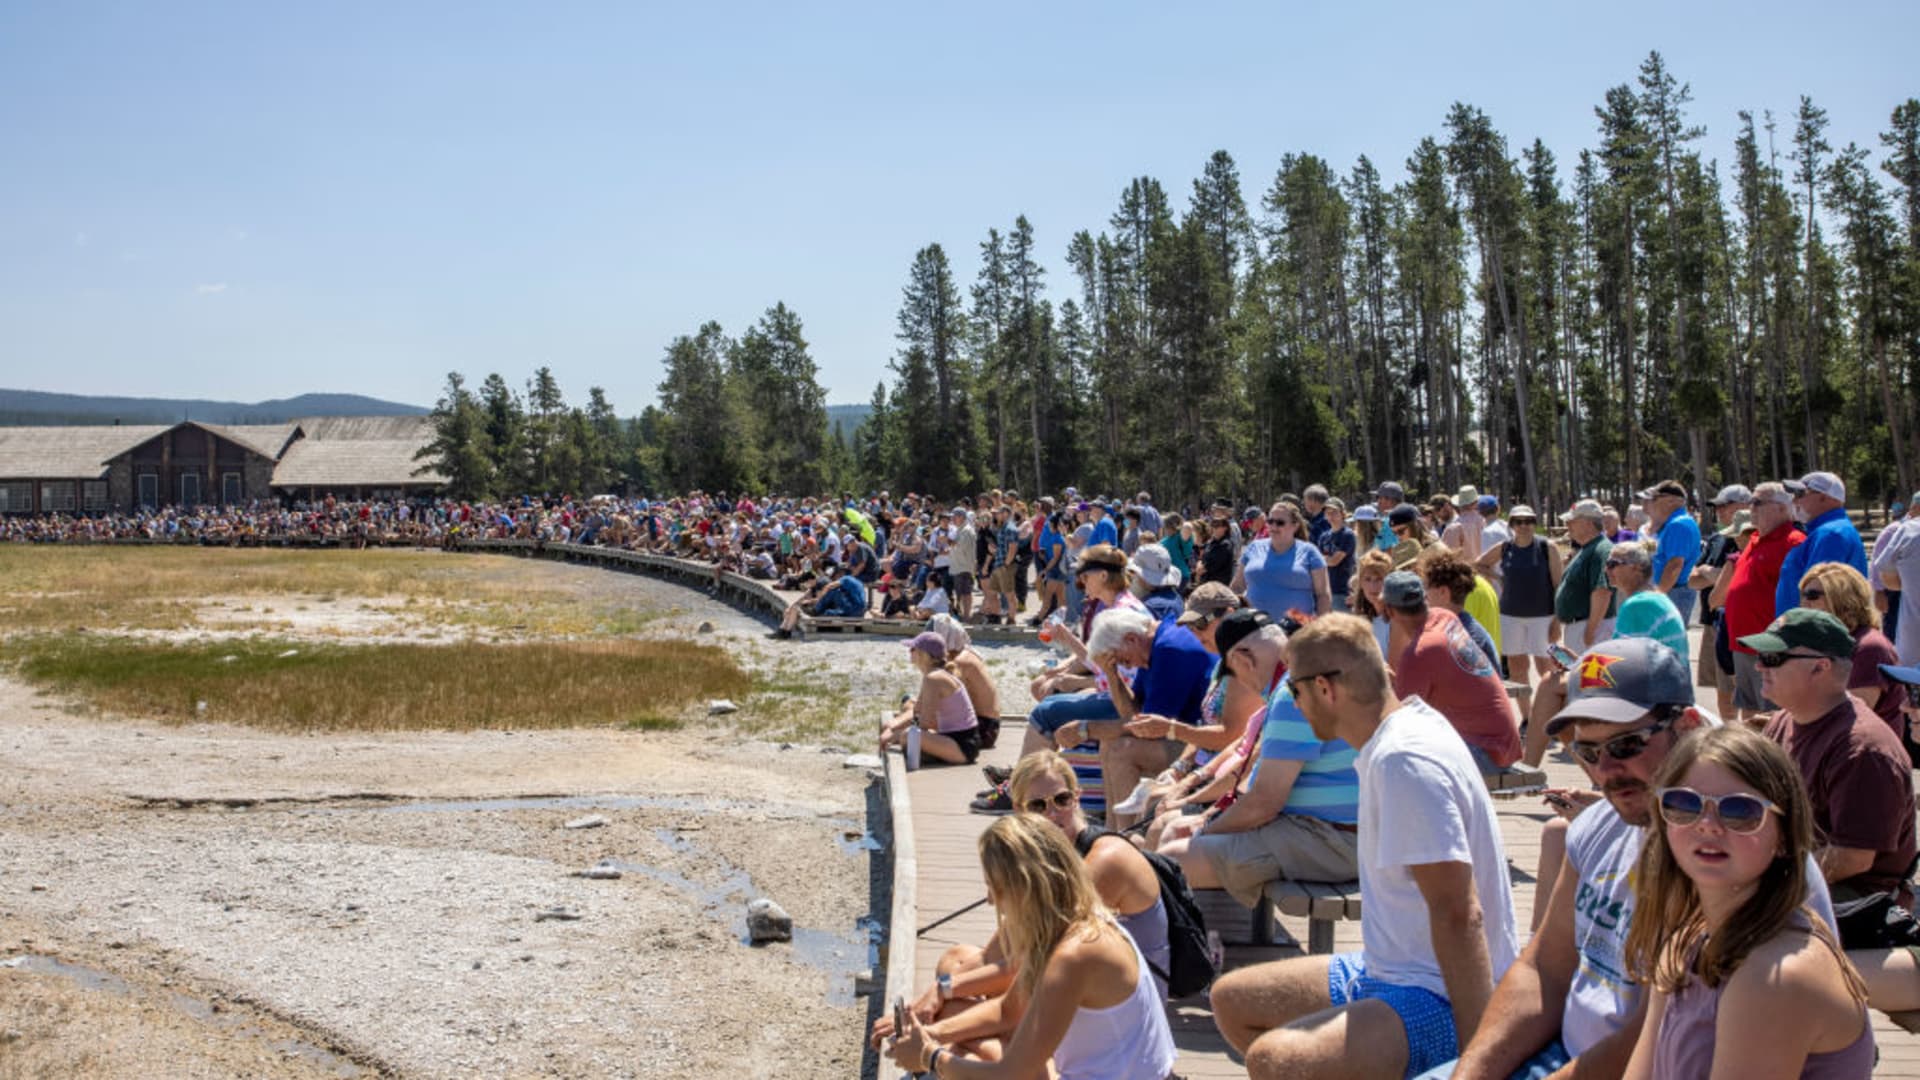 Crowds gather to watch the Old Faithful Geyser erupt at Yellowstone National Park on July 14, 2021.